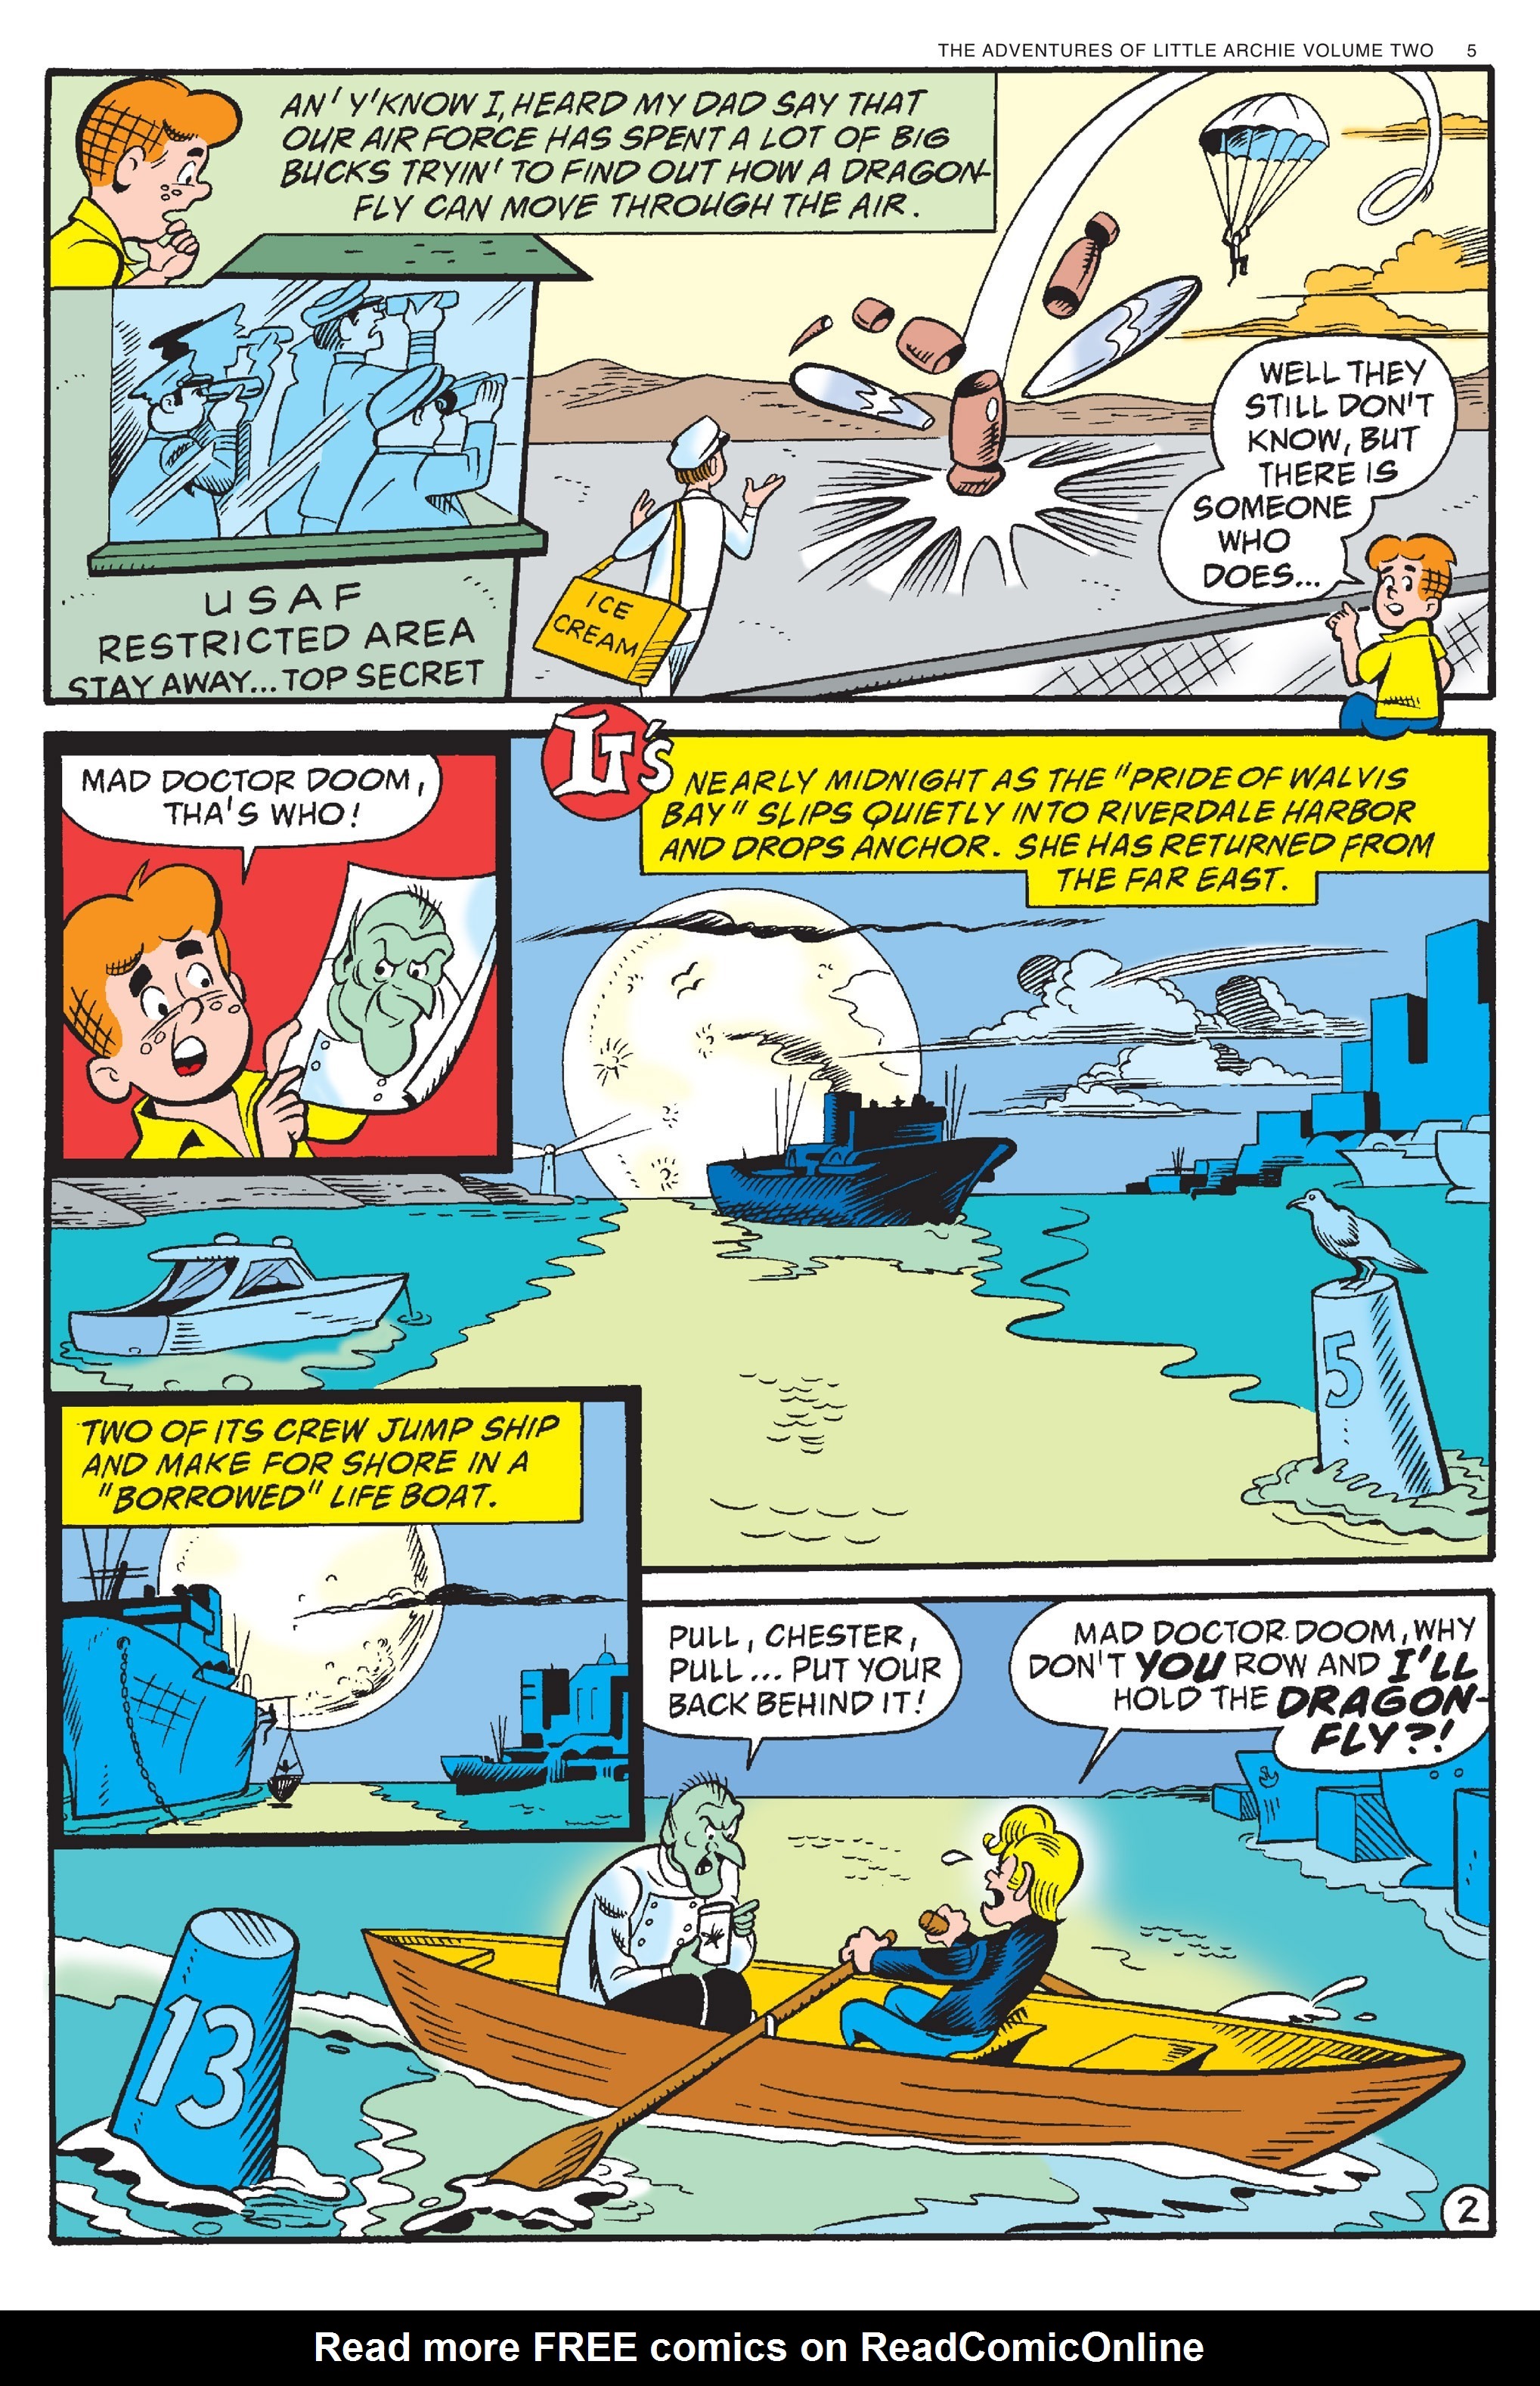 Read online Adventures of Little Archie comic -  Issue # TPB 2 - 6